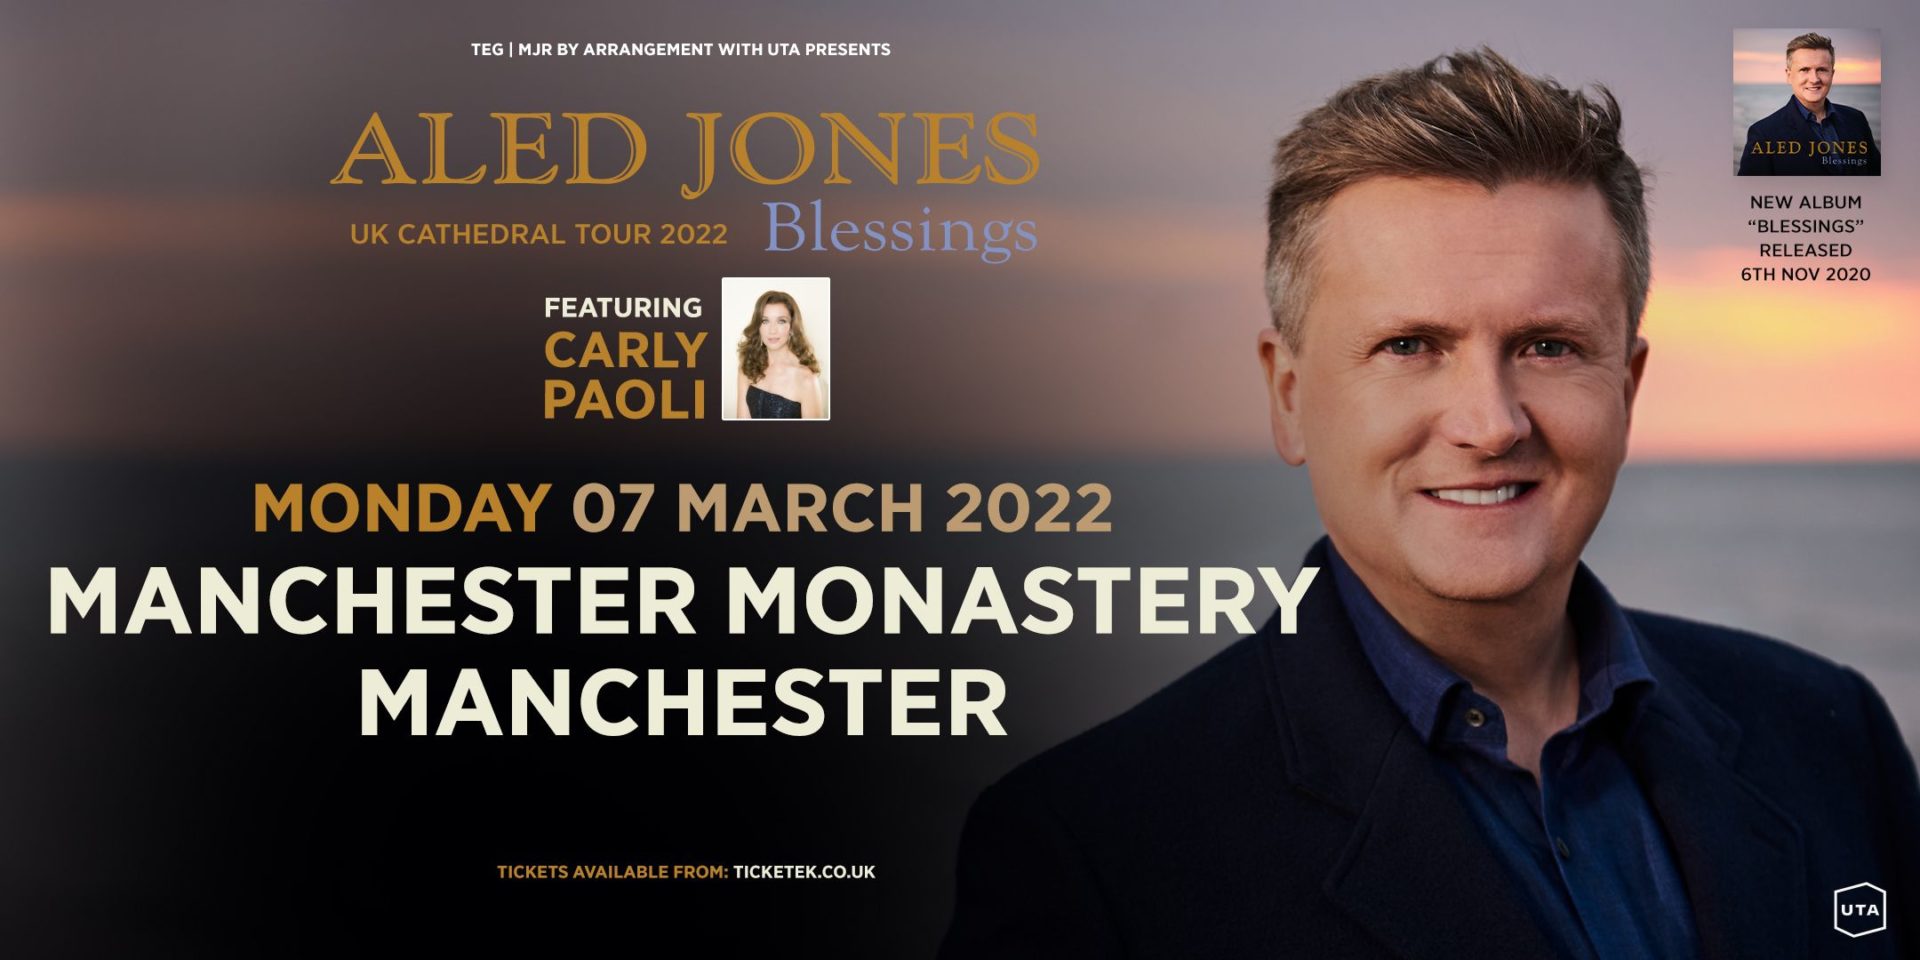 Aled Jones Cathedral Tour 2022 Manchester Monastery